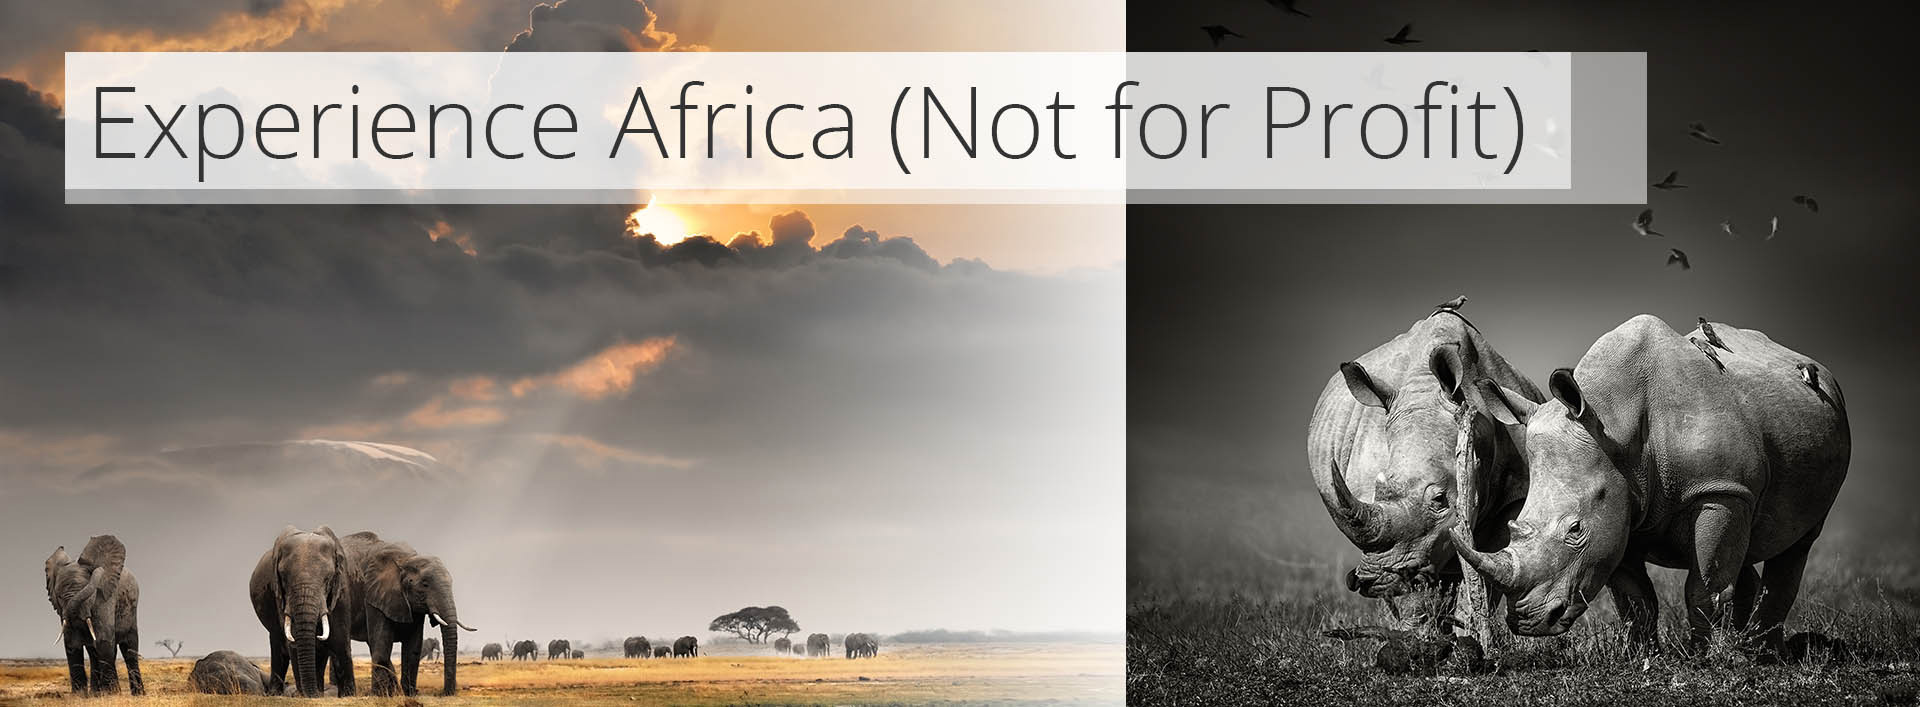 experience africa (not for profit)